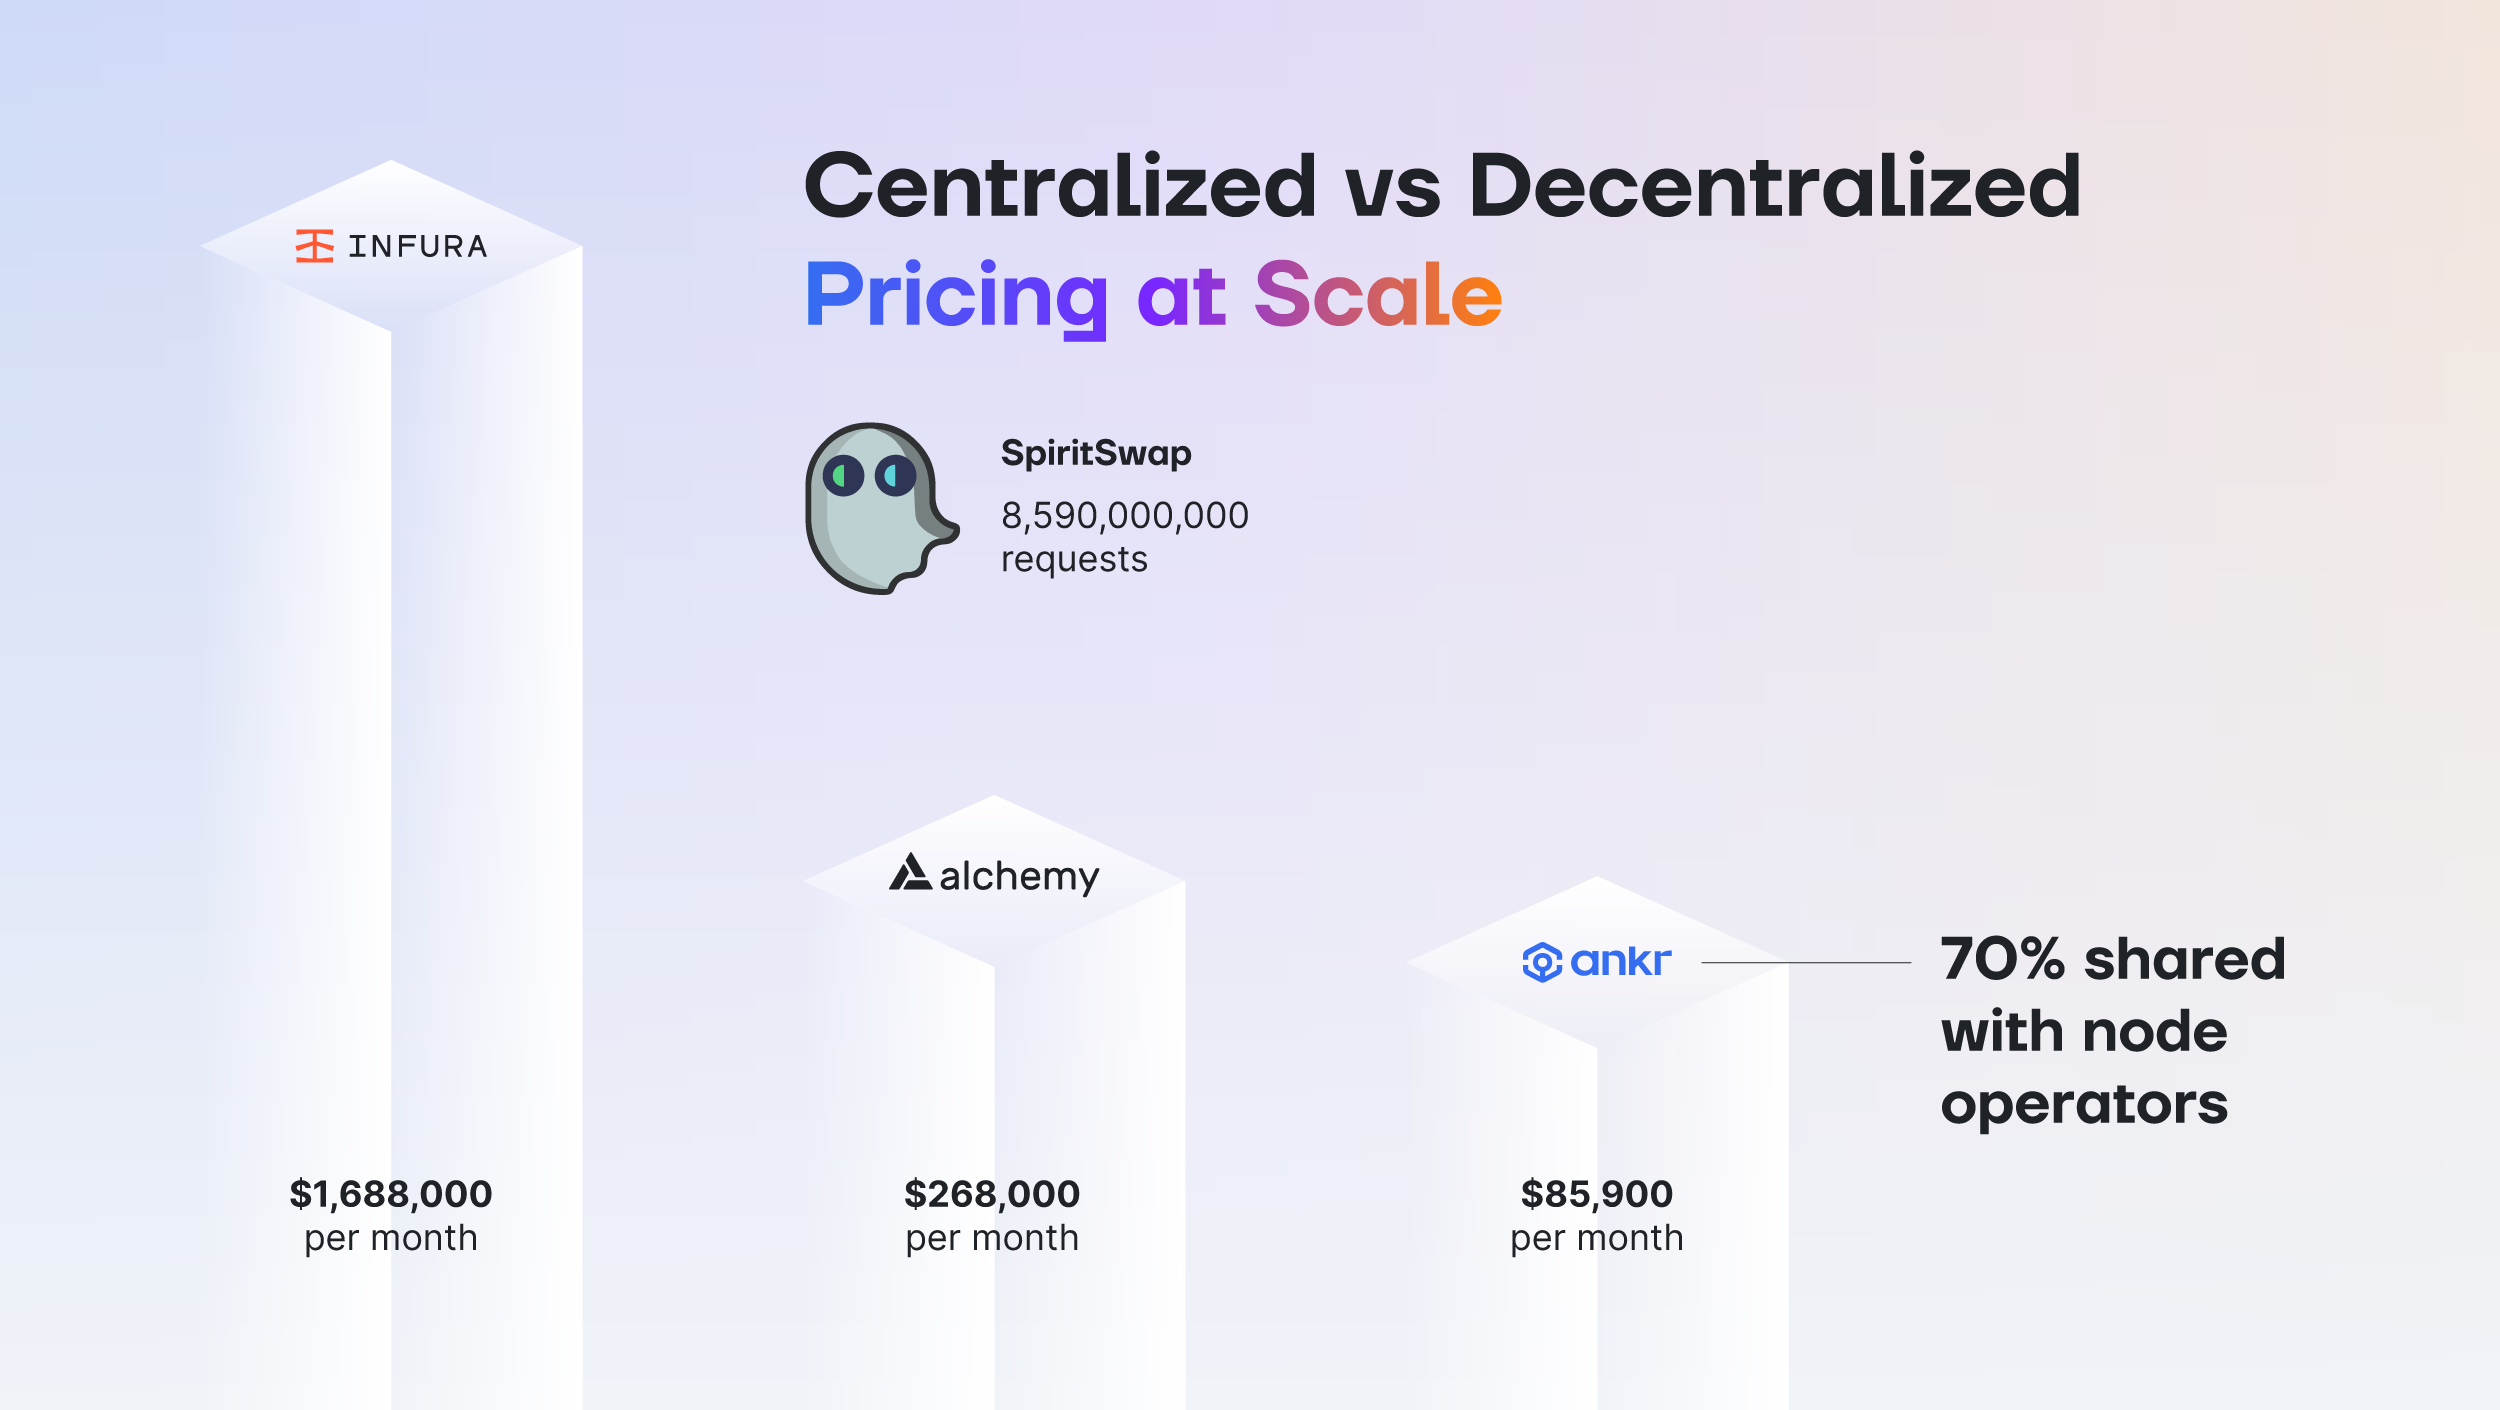 736_Centralized_vs_Decentralized_Pricing_at_Scale_4516a97794.png